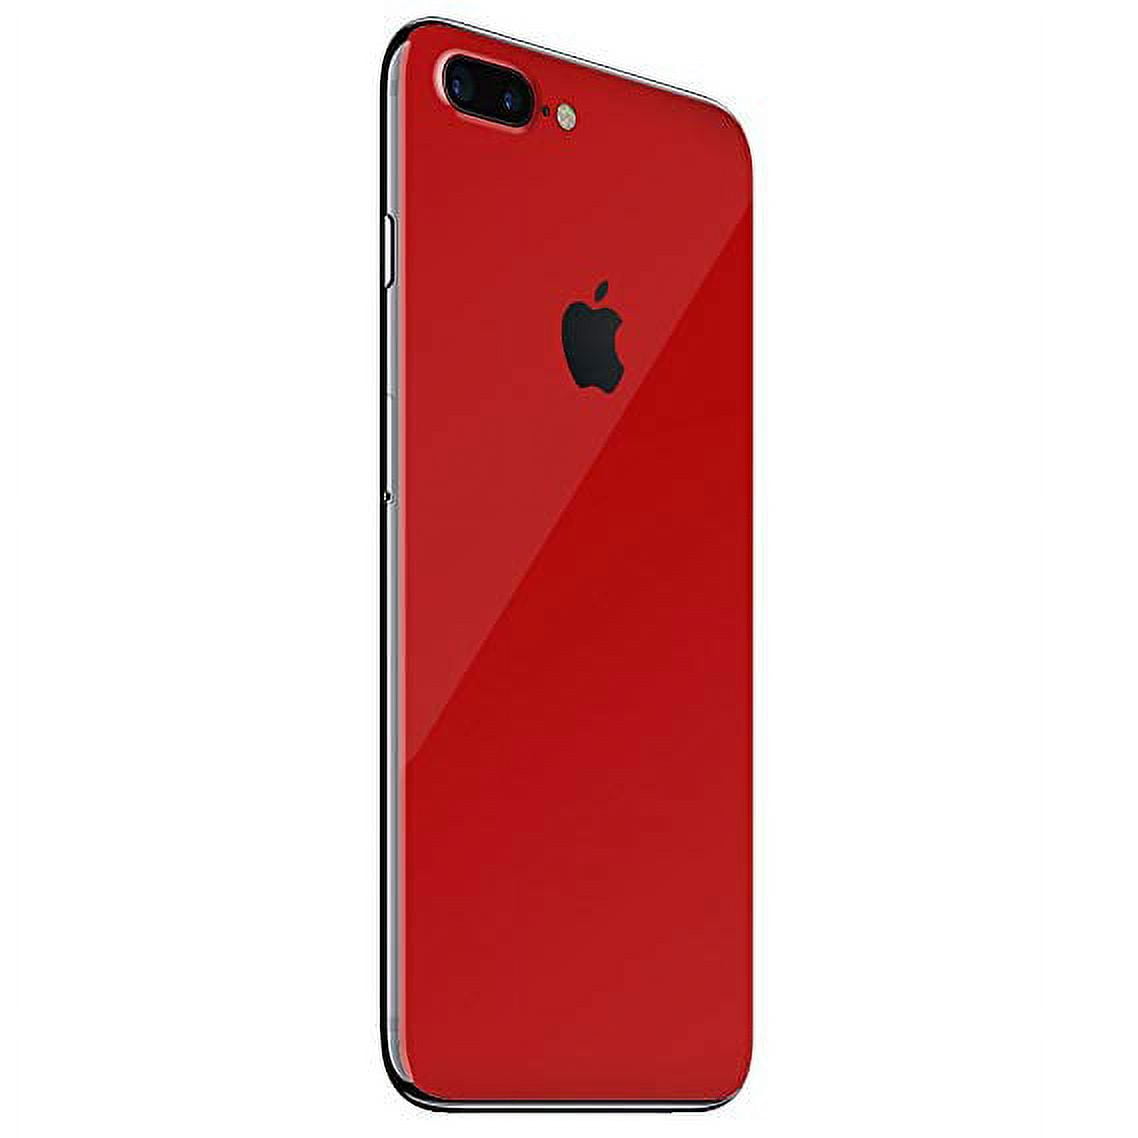 iPhone - iPhone 7 plus product red 128GB simフリーの通販 by ...